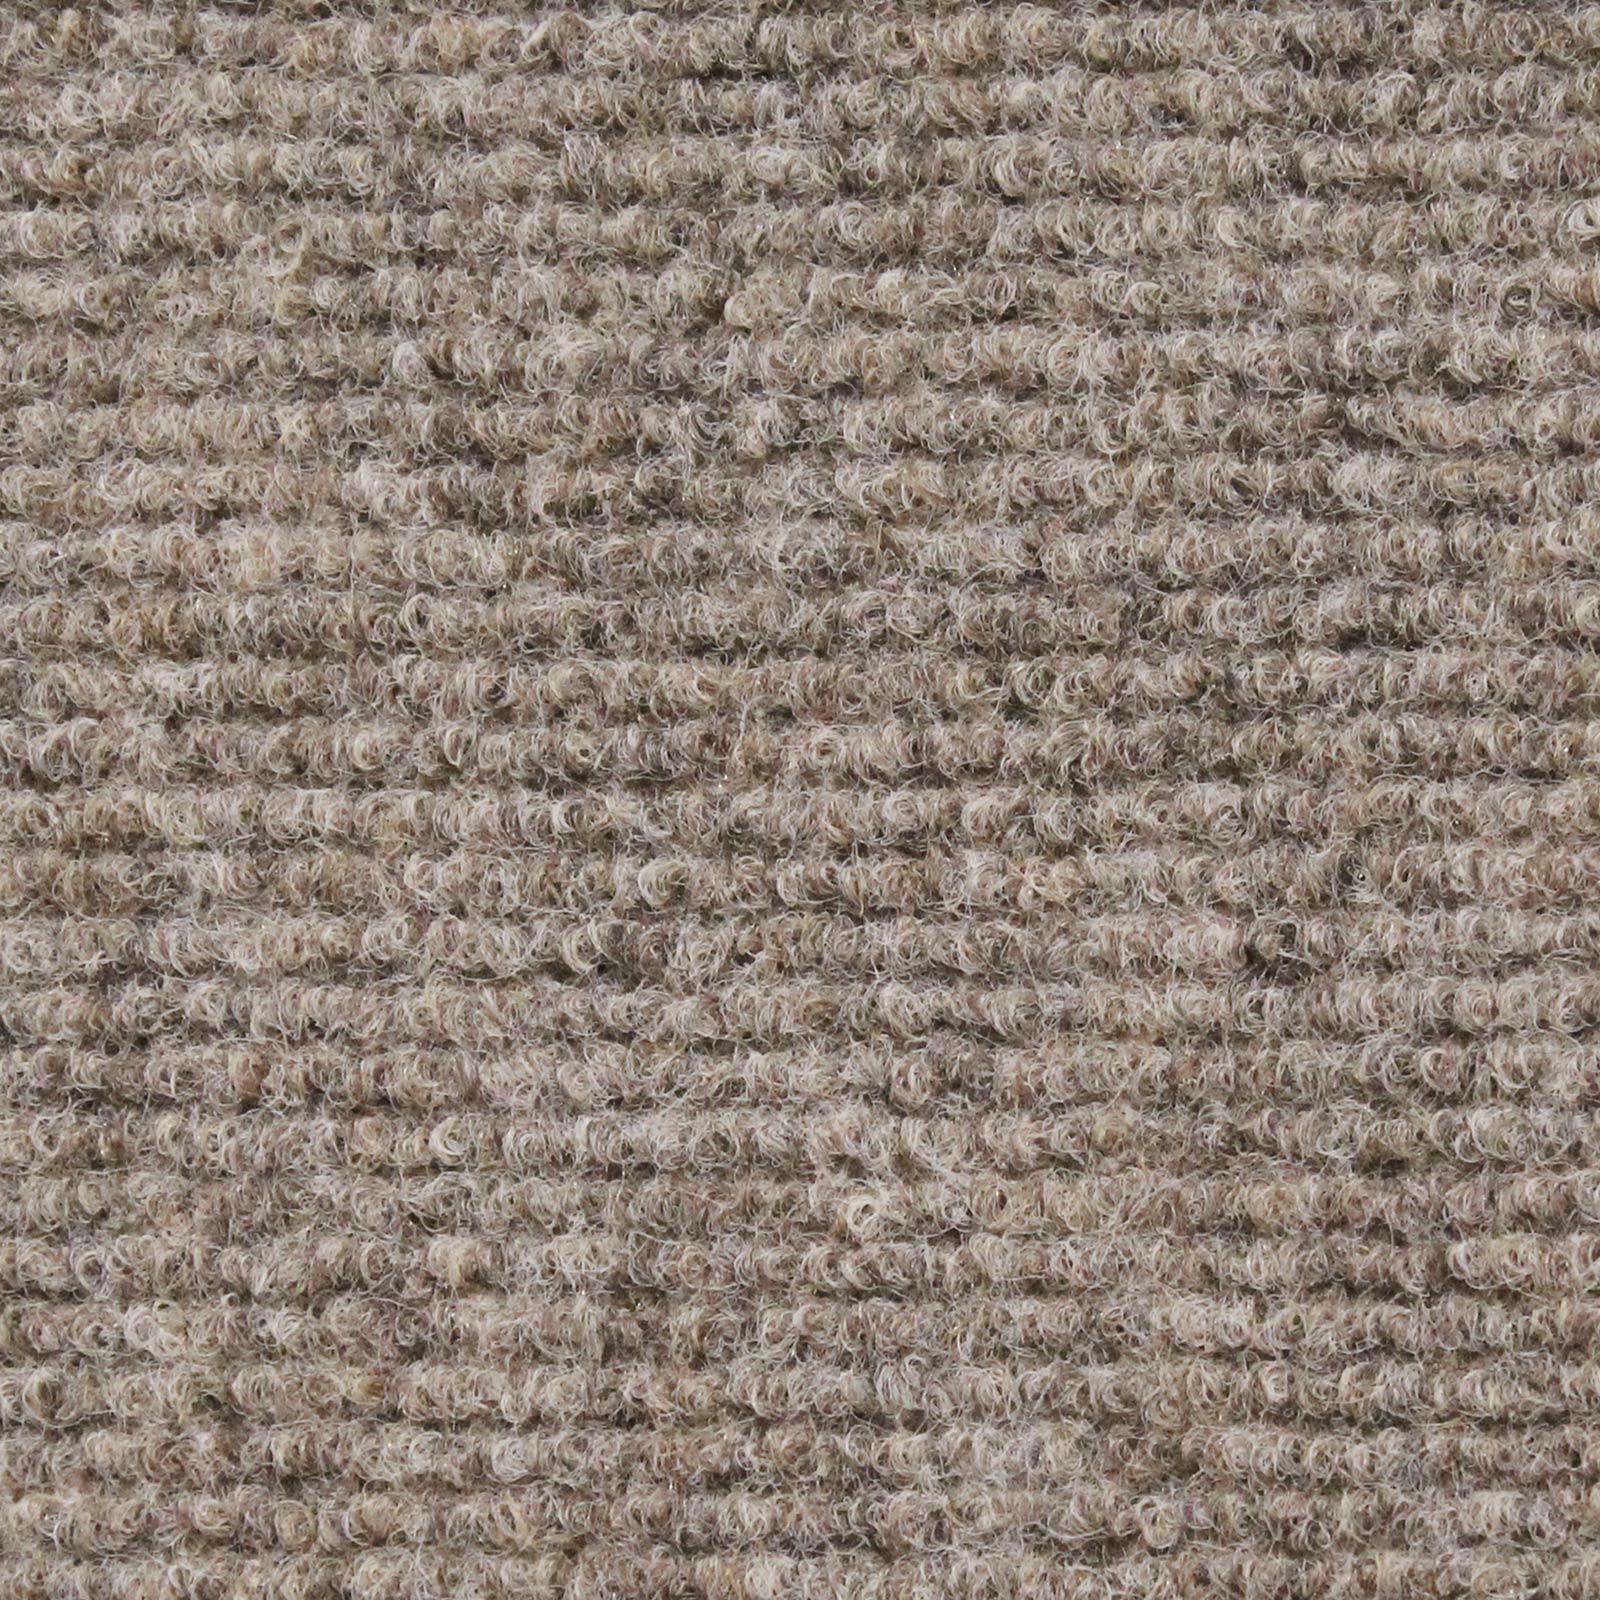 House, Home and More Indoor/Outdoor Carpet - Brown - 6' x 20'